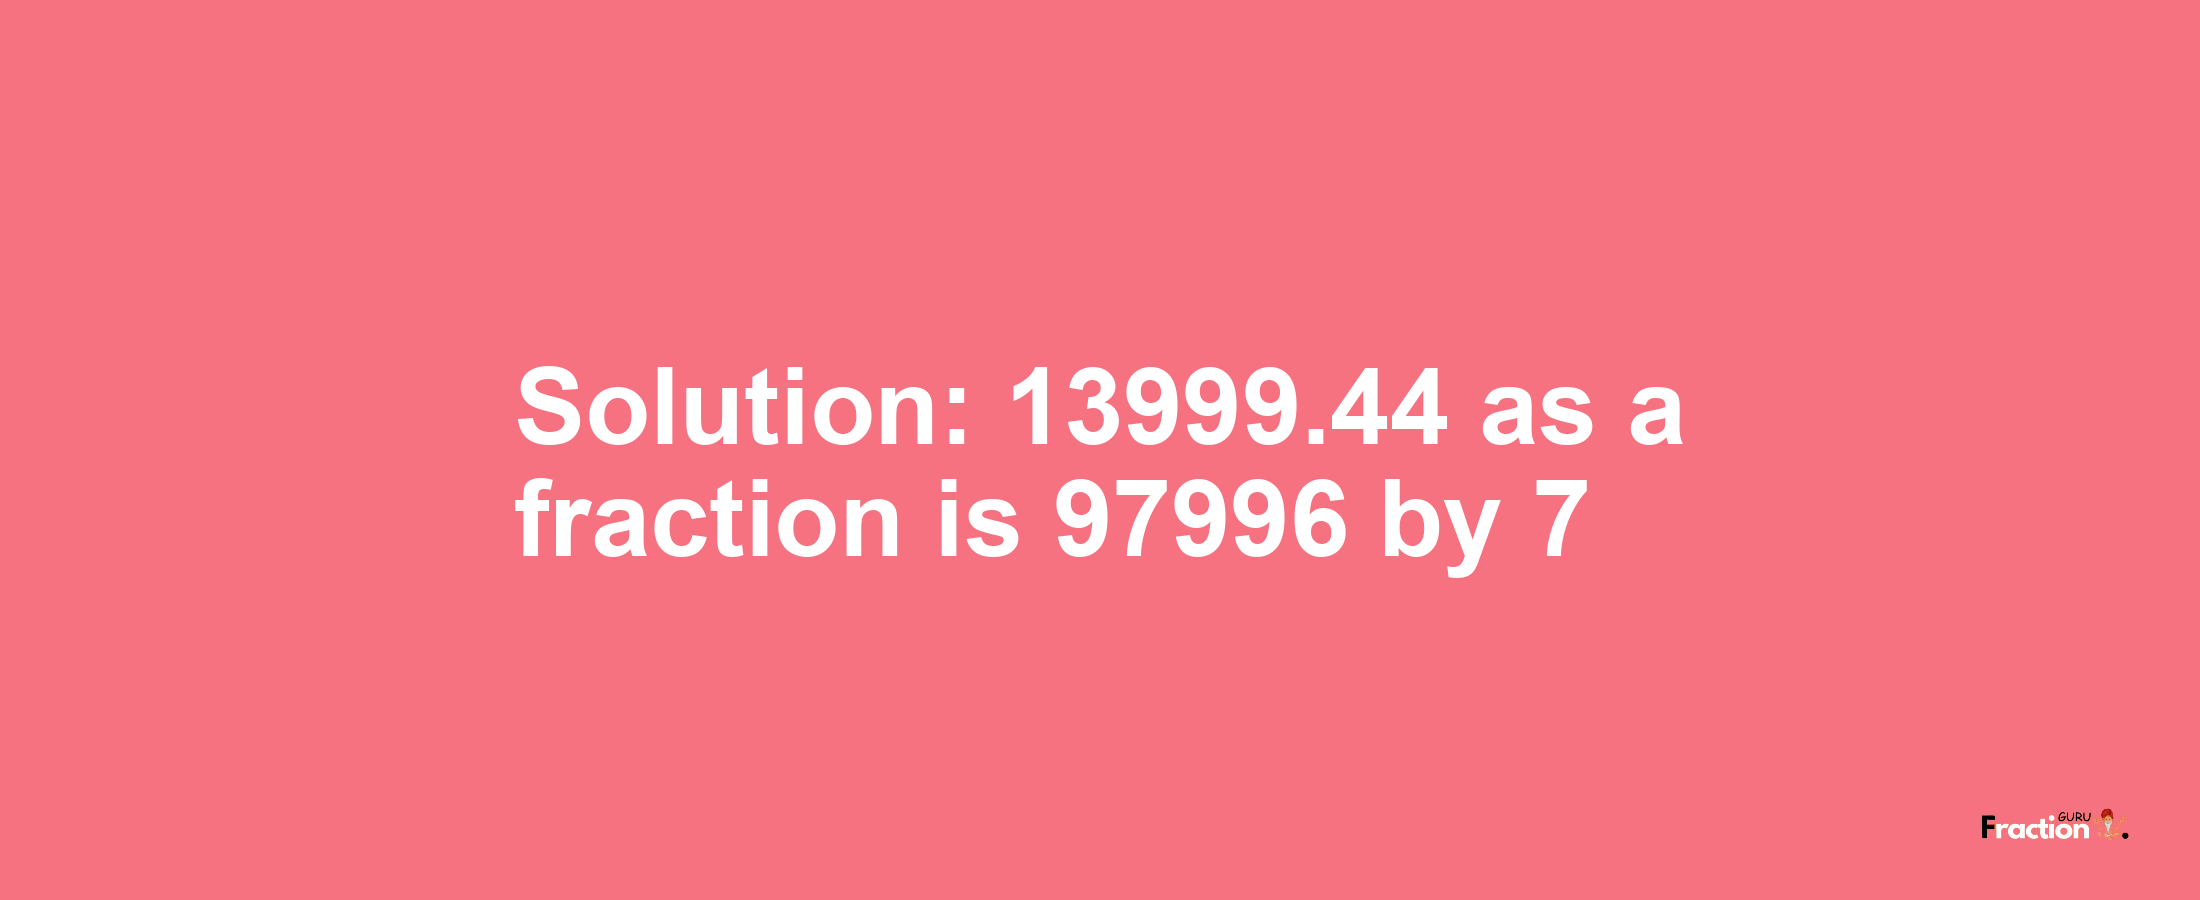 Solution:13999.44 as a fraction is 97996/7